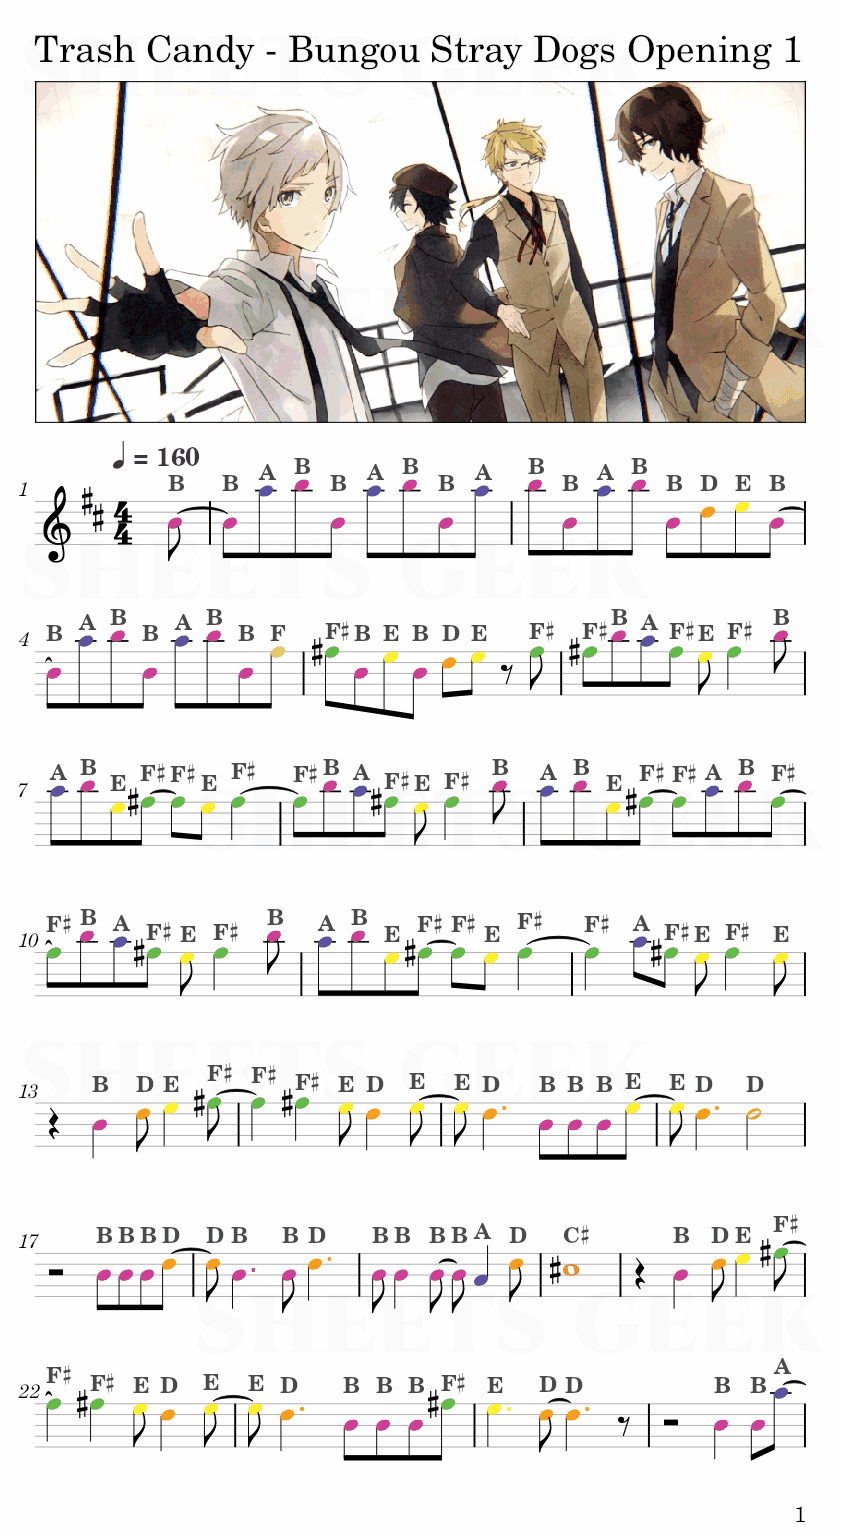 Trash Candy - Bungou Stray Dogs Opening 1 Easy Sheet Music Free for piano, keyboard, flute, violin, sax, cello page 1